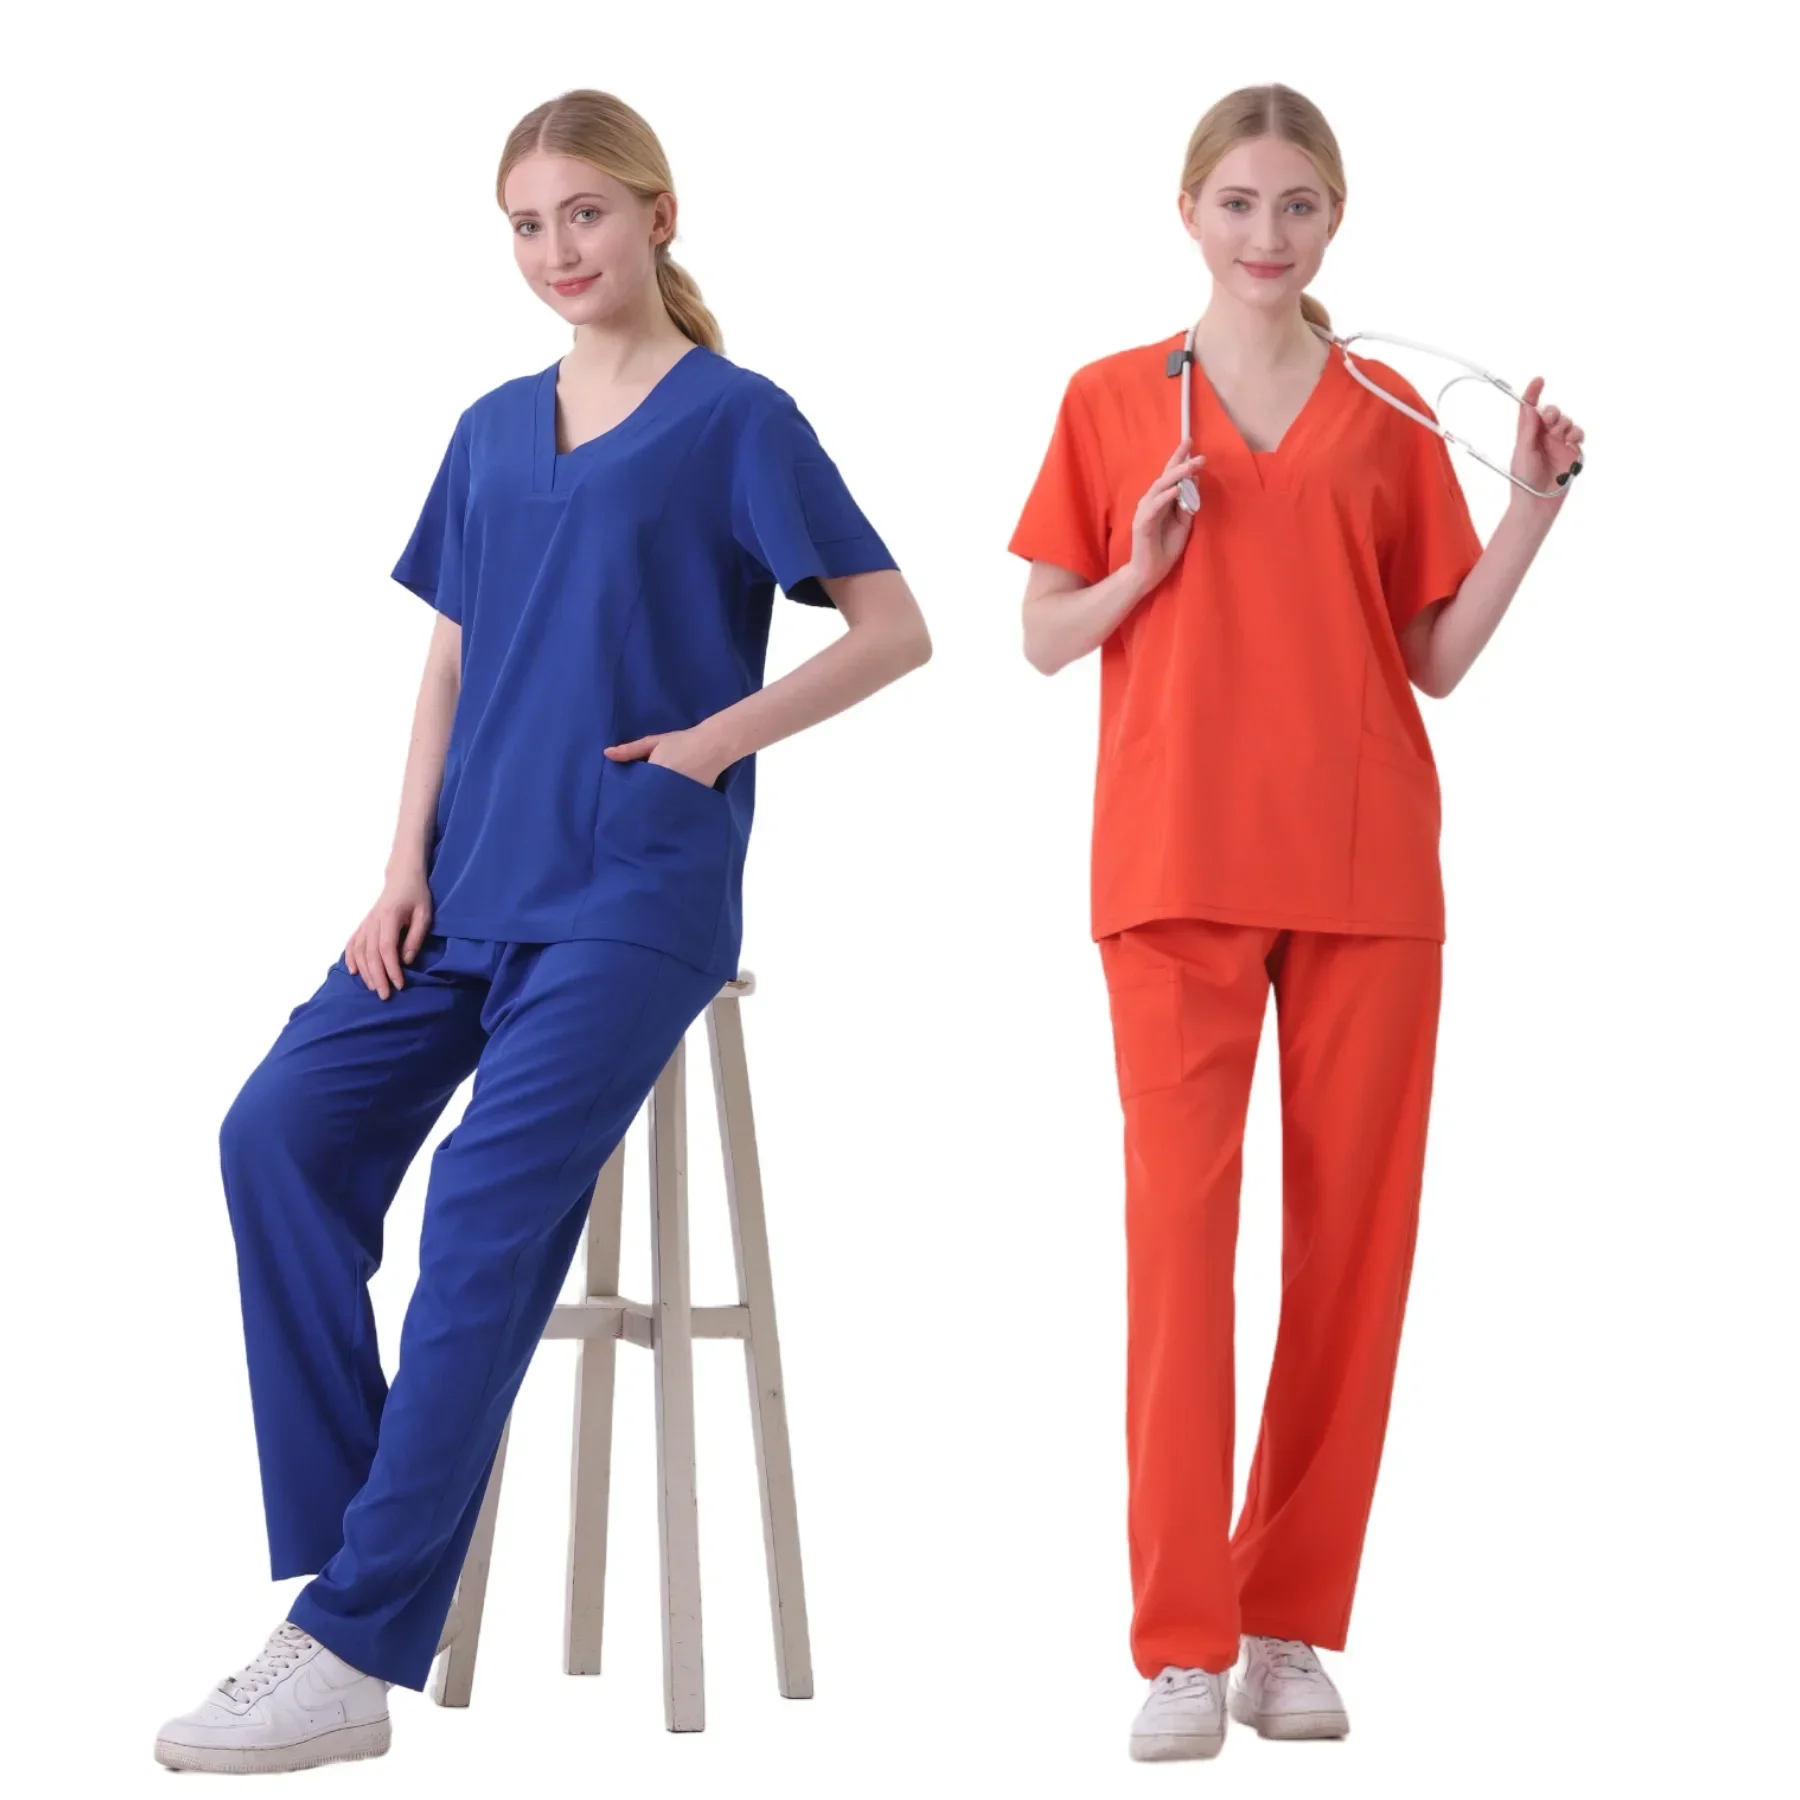 

High Quality Scrub Uniform Jogging Pant Pet Grooming Doctor Work Clothes Health Care Medical School Accessories Nursing Workwear